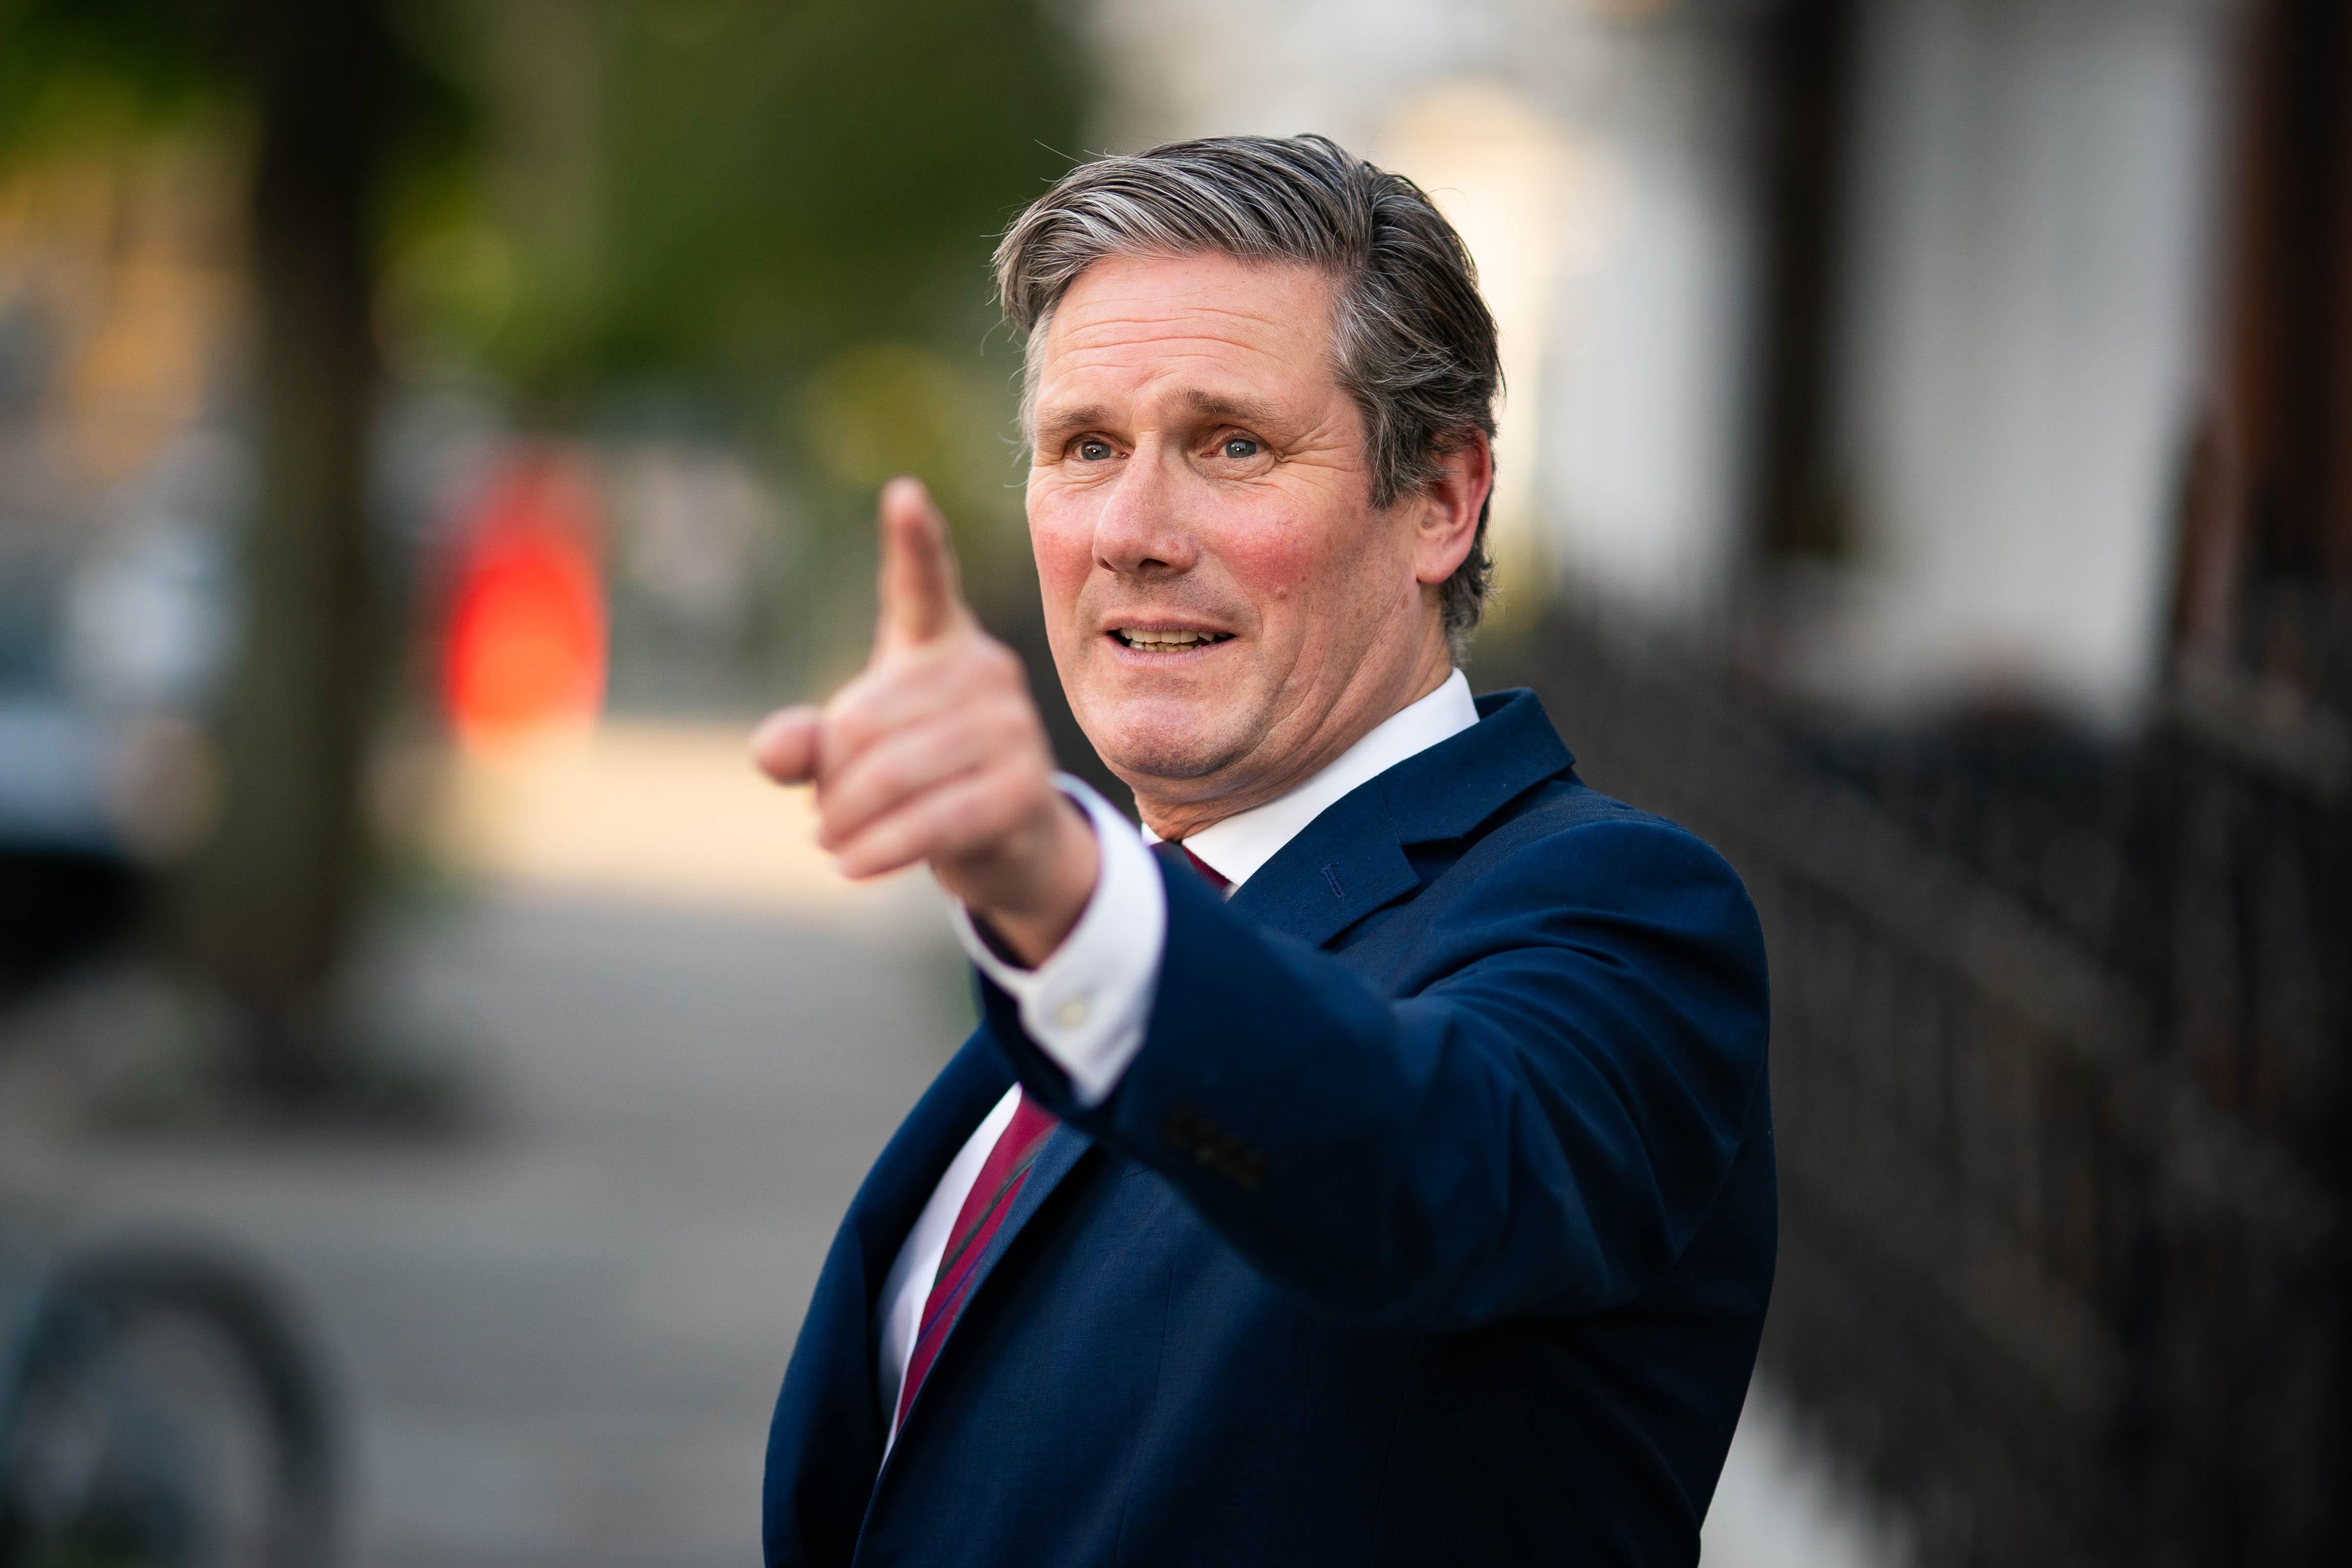 Keir Starmer’s Labour Party has a steady 18-point lead in opinion polls